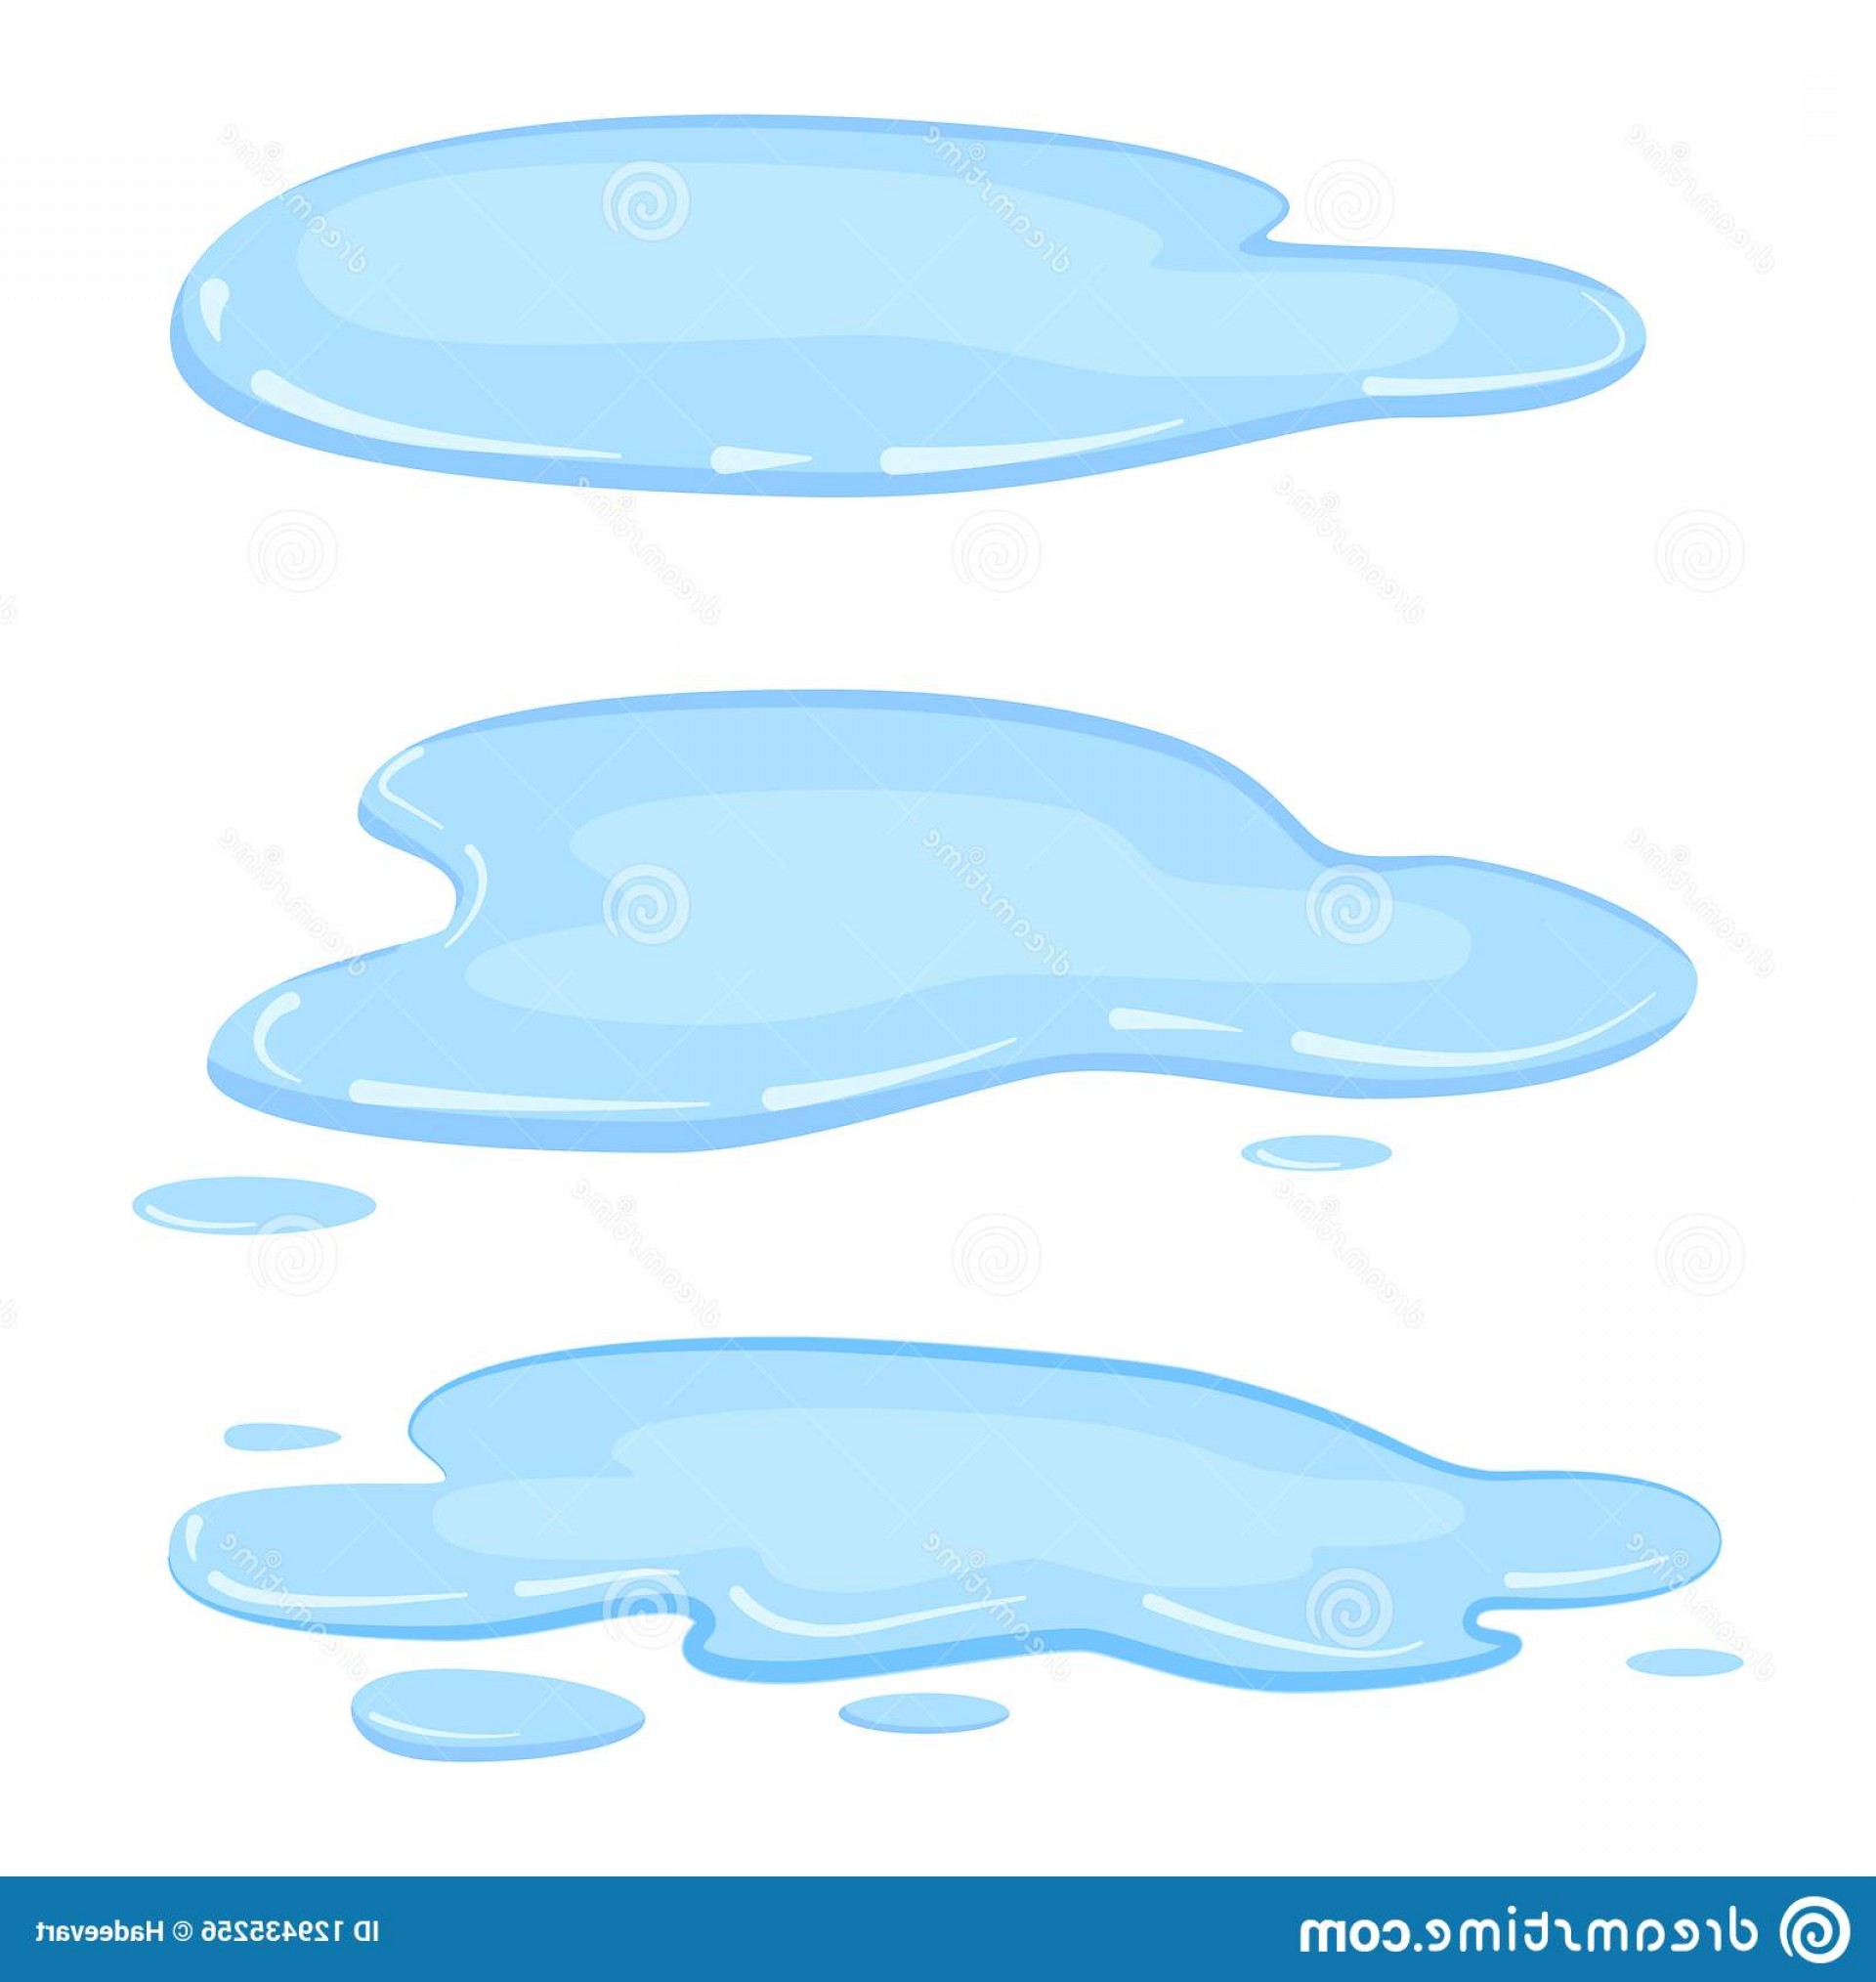 Puddle Illustrations, Royalty-free Vector Graphics & Clip Art - Istock 76E